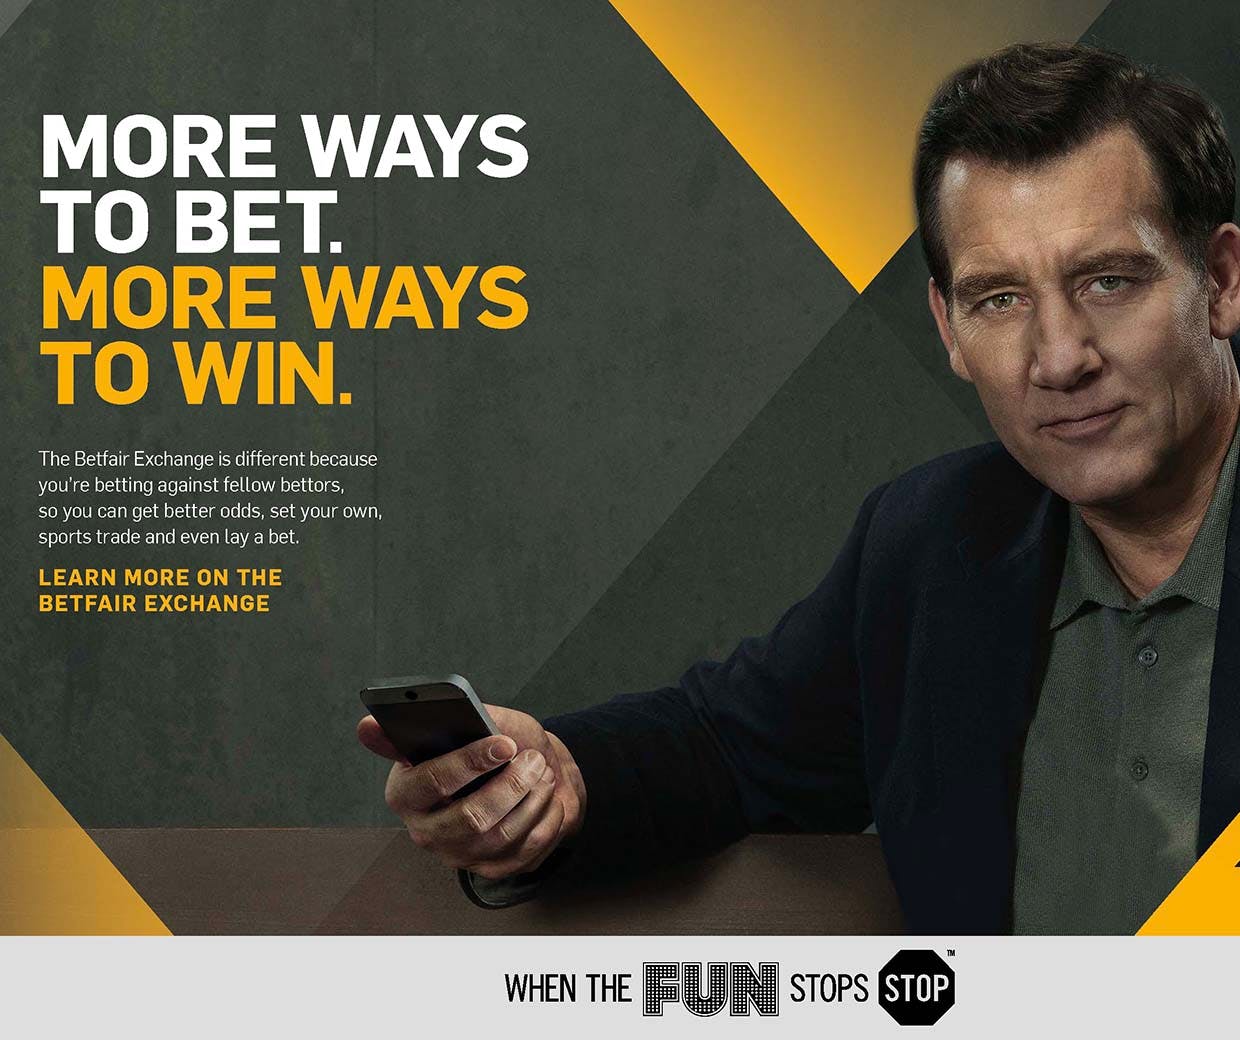 Betfair shifts focus from TV to digital as gambling ad ban takes effect